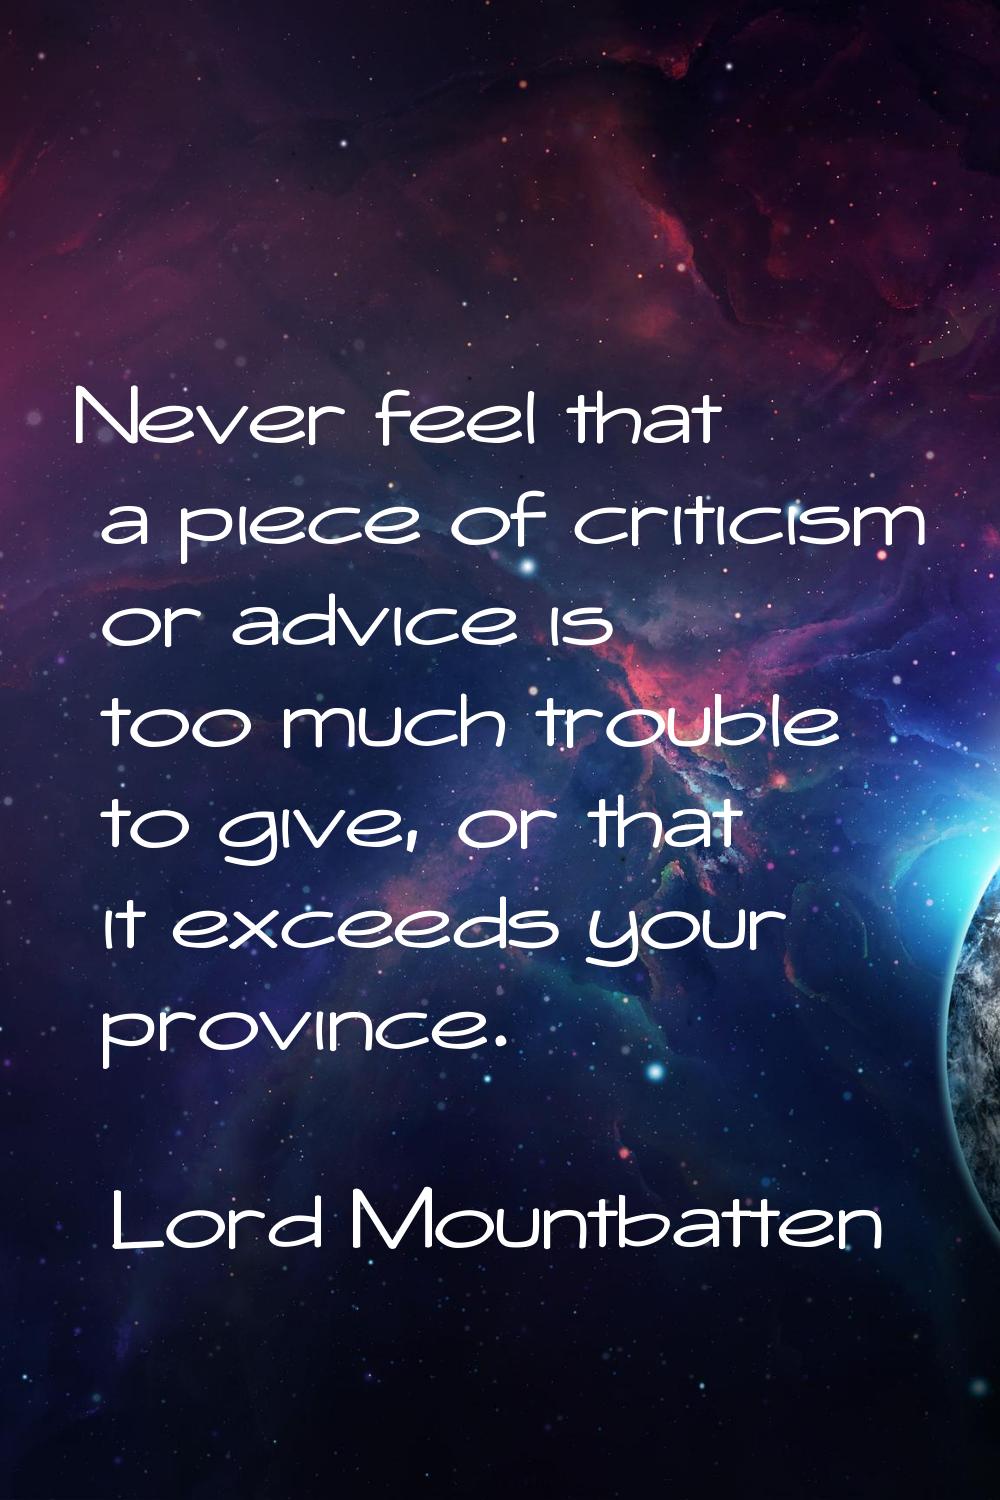 Never feel that a piece of criticism or advice is too much trouble to give, or that it exceeds your